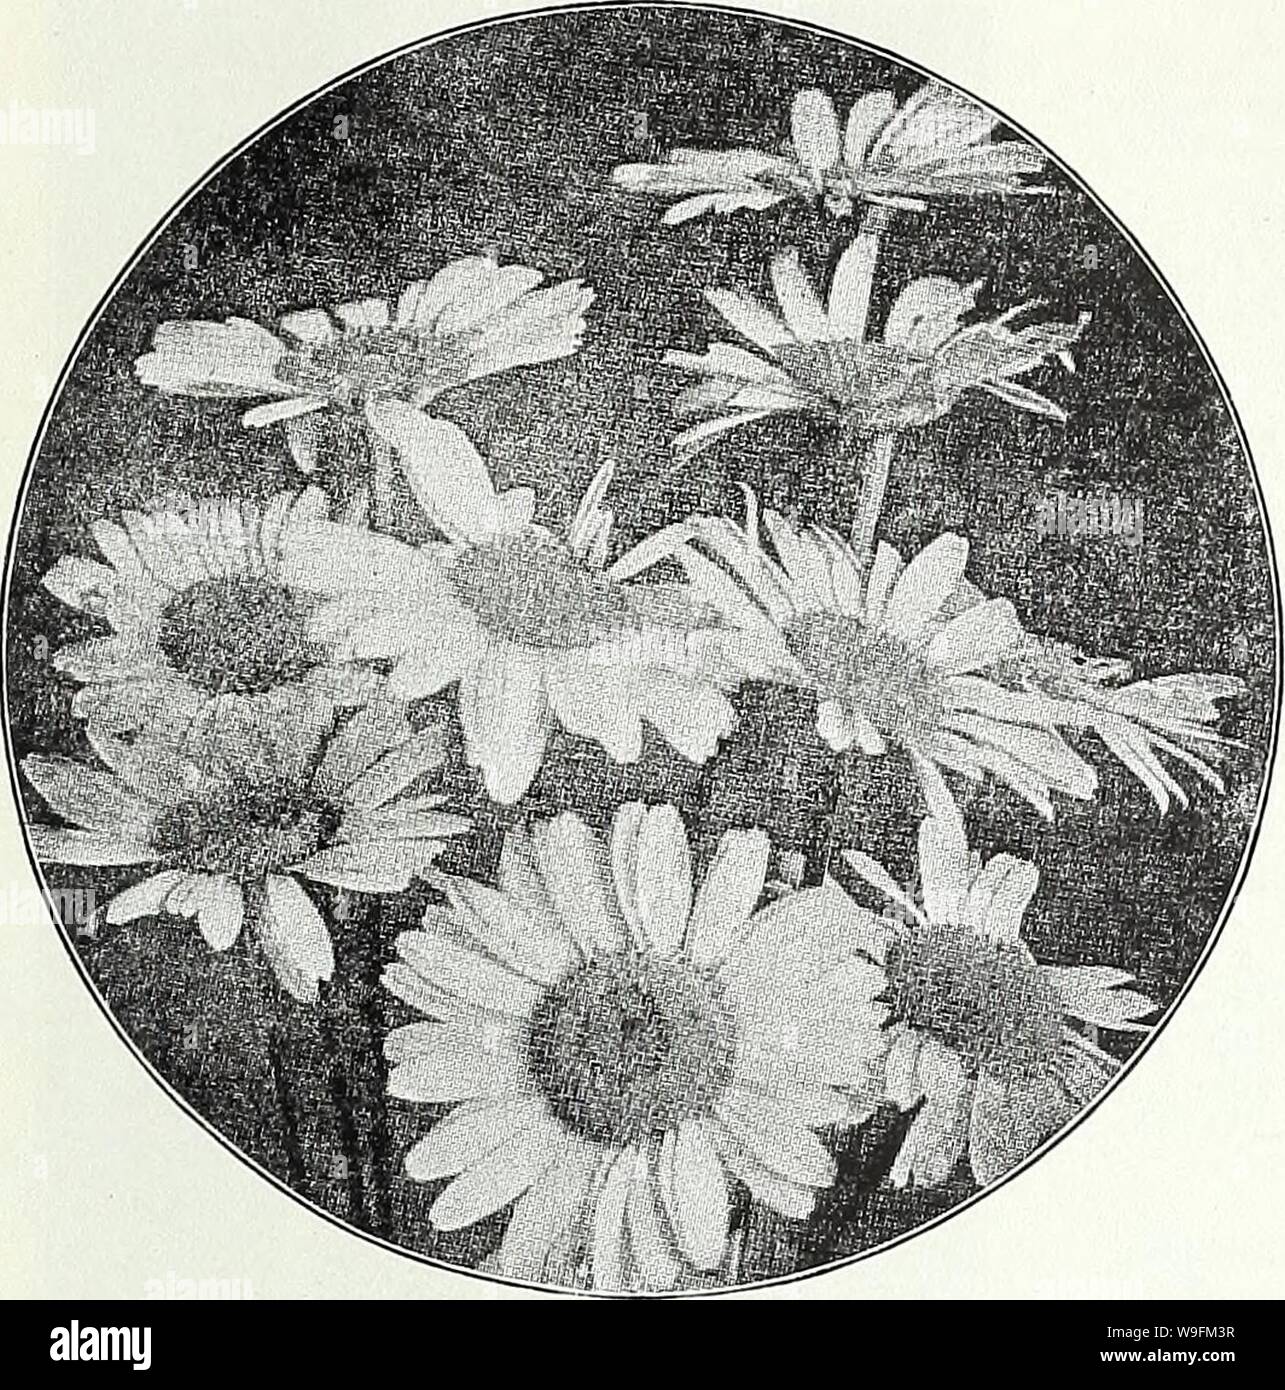 Archive image from page 52 of Currie's garden annual  spring. Currie's garden annual : spring 1936 61st year  curriesgardenann19curr 2 Year: 1936 ( CURRIE BROTHERS CO., MILWAUKEE, WIS. Page 47    ARABIS (Rock Cress) ALPINA—A hardy perennial and one of the earliest and pretti- est spring flowers. The spreading tufts are covered with a sheet of pure white flowers as soon as the snow disappears. Unequalled for rockeries or edging; withstands the drought, and is always neat. 6 inches. Plants, price, each, 25c; per doz., $2.50; seeds,  oz., 25c   Pkt. 10c AURICULA (Primula Auricula) A well-known fa Stock Photo